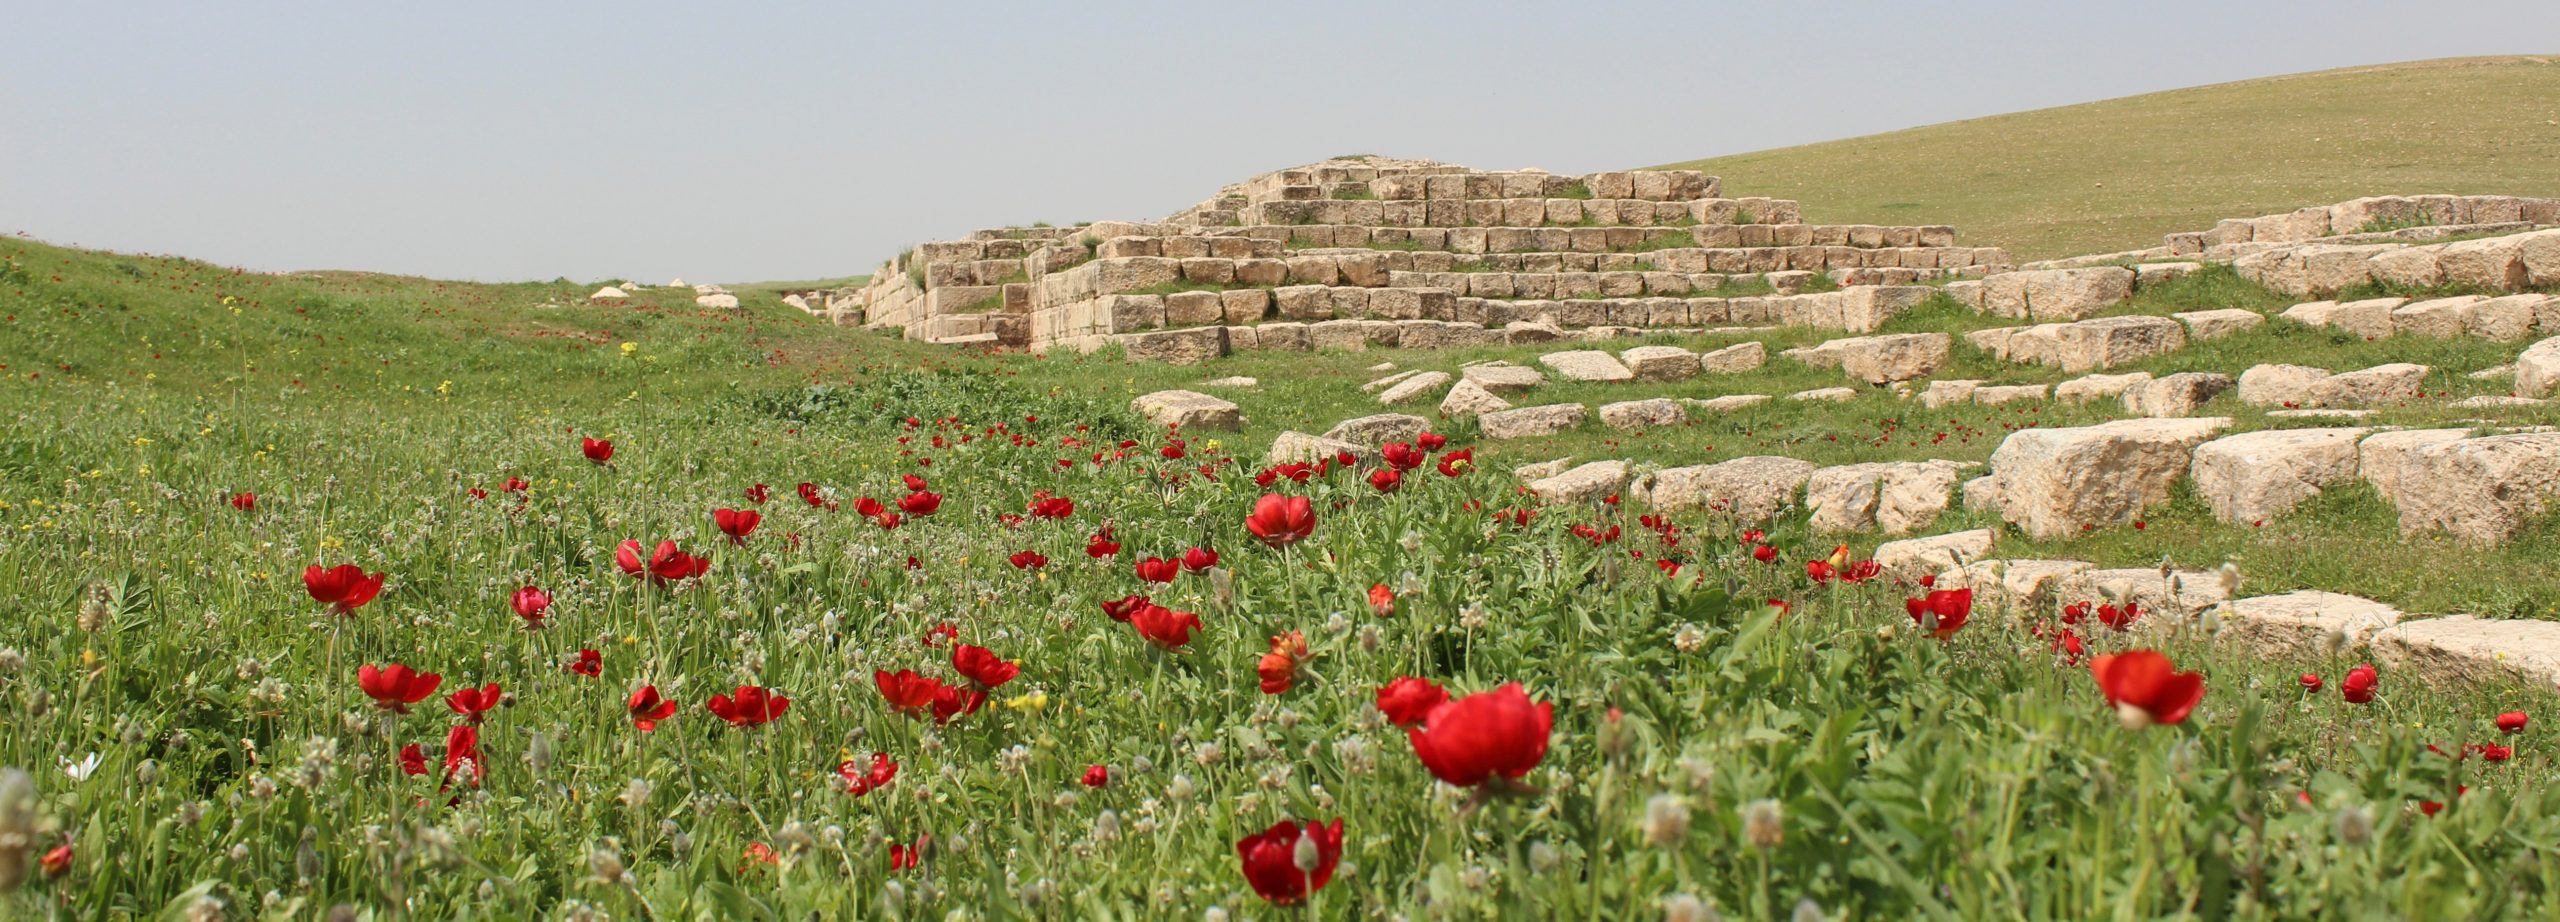 Poppies in front of the Assyrian Jerwan Aqueduct. Photo credit: Explore Mesopotamia